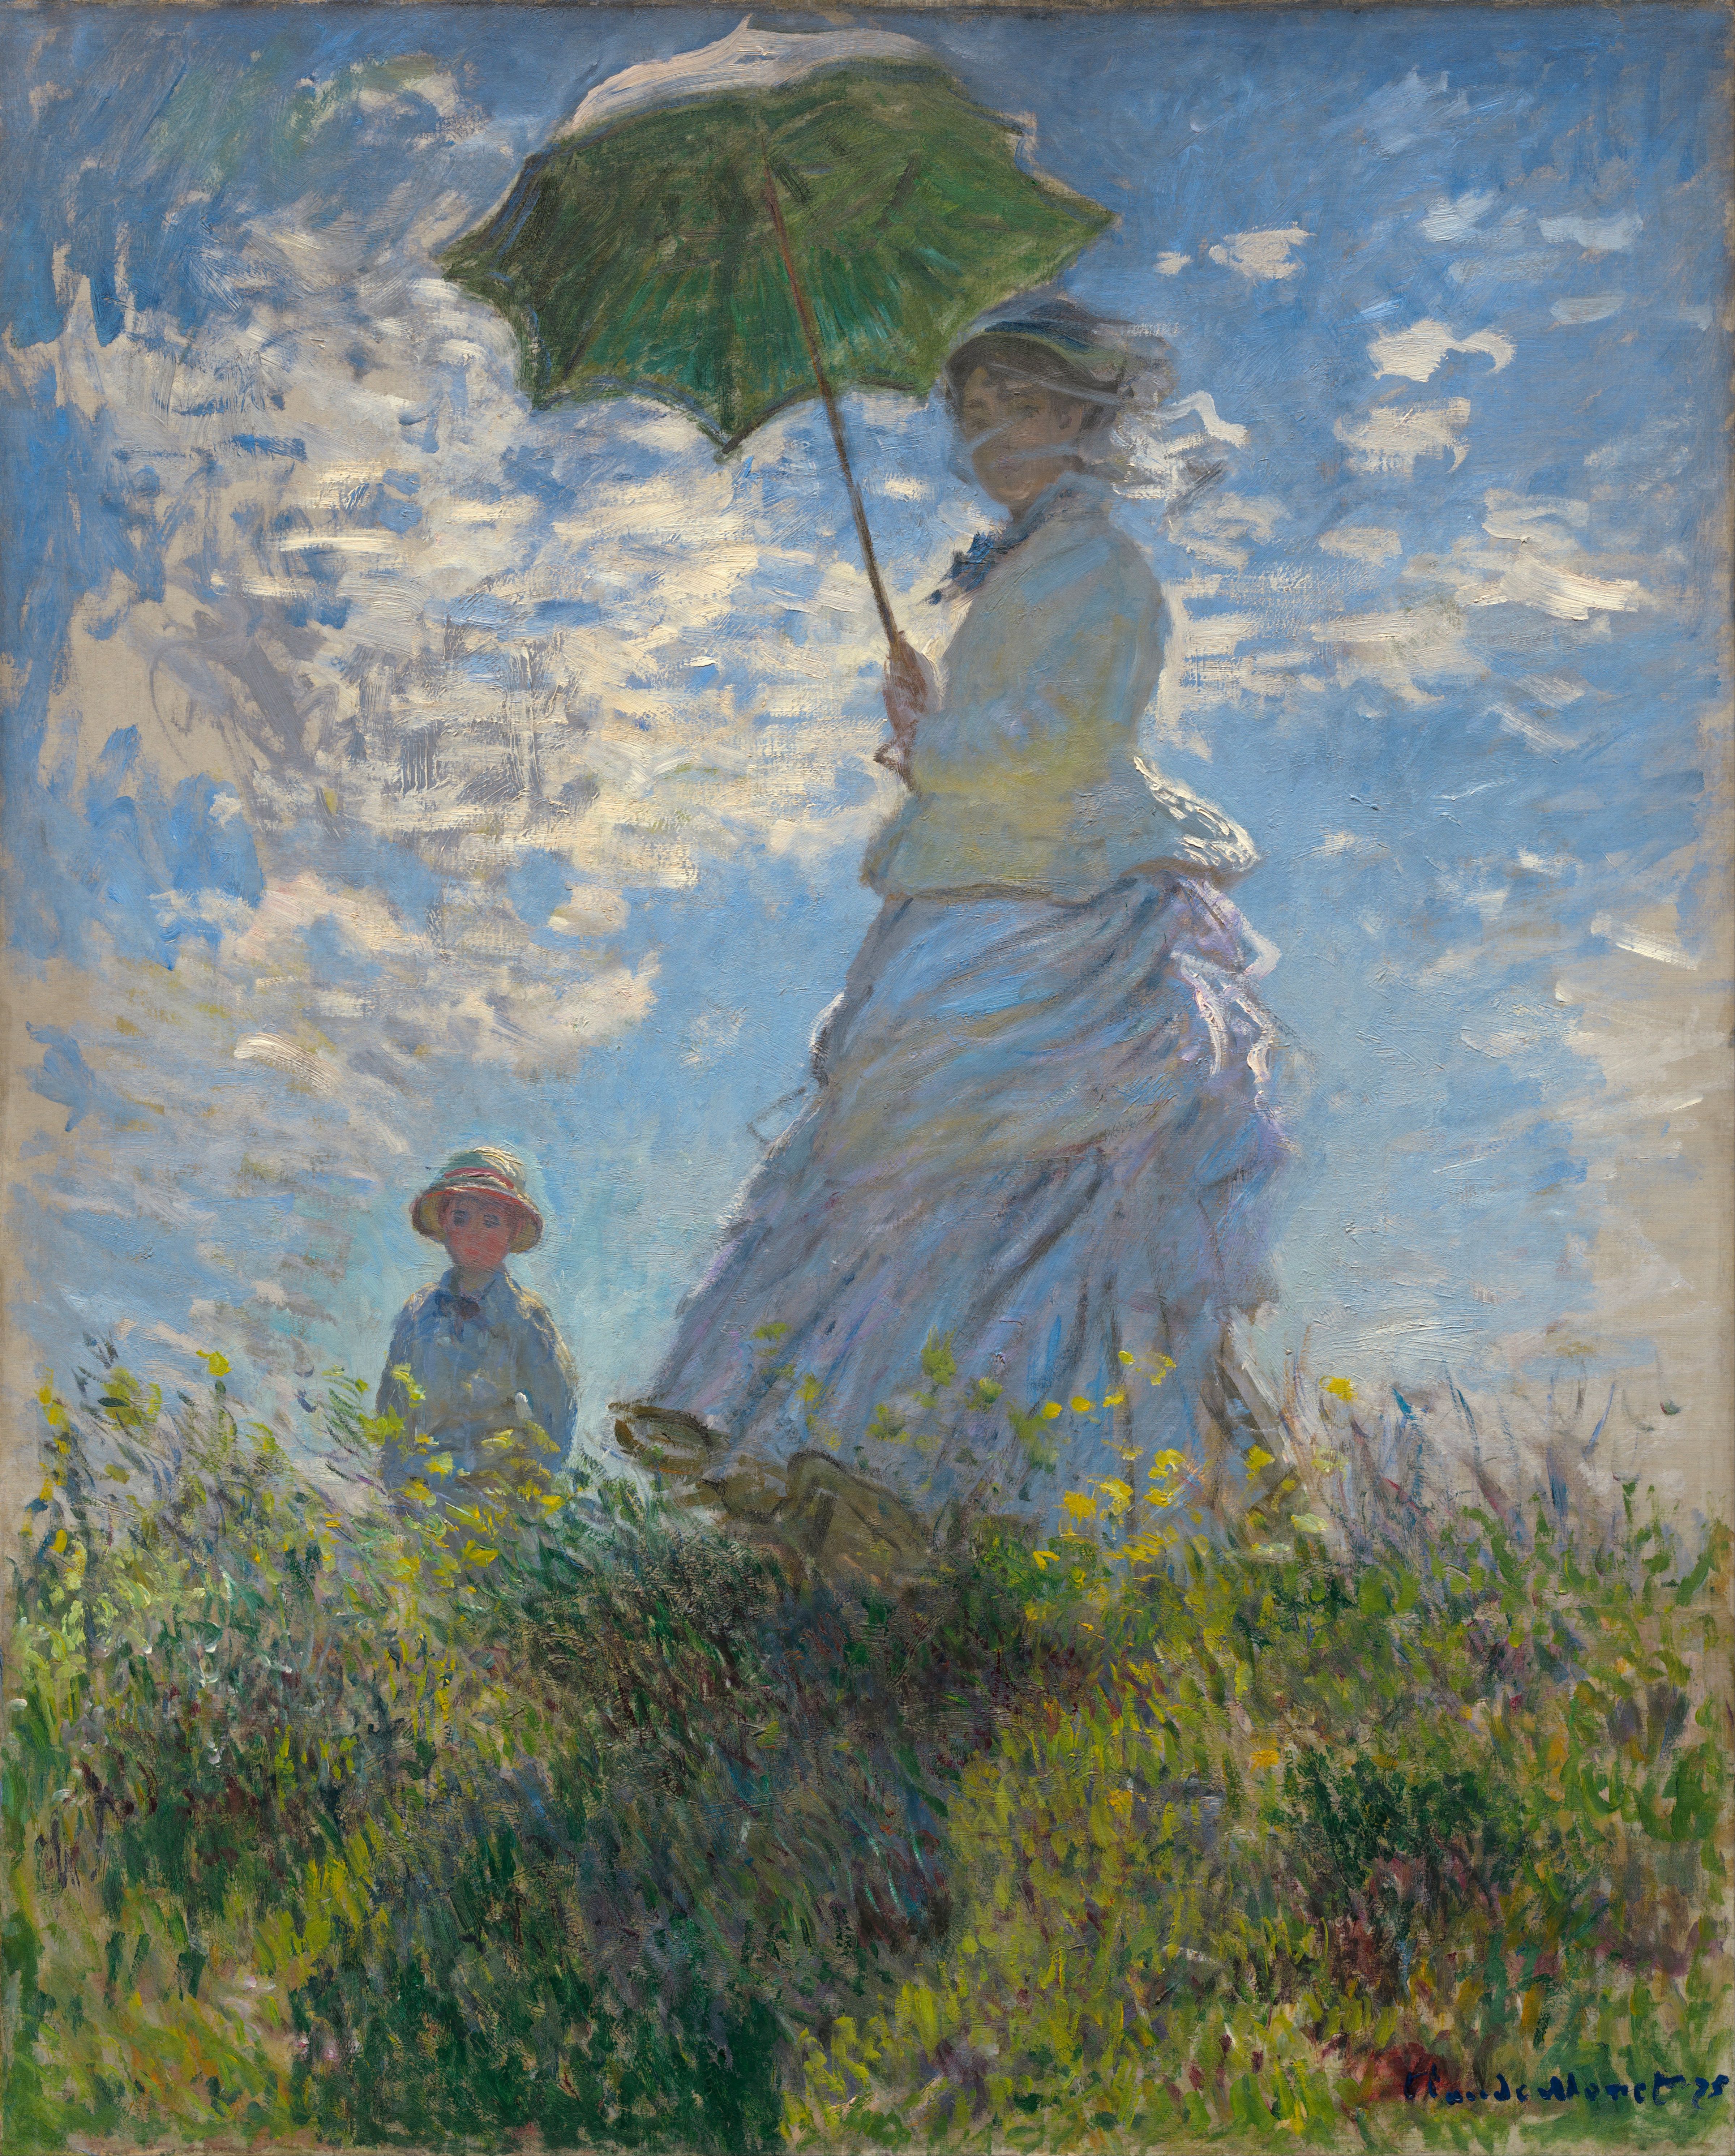 Claude Monet, Woman with a Parasol via National Gallery of Art